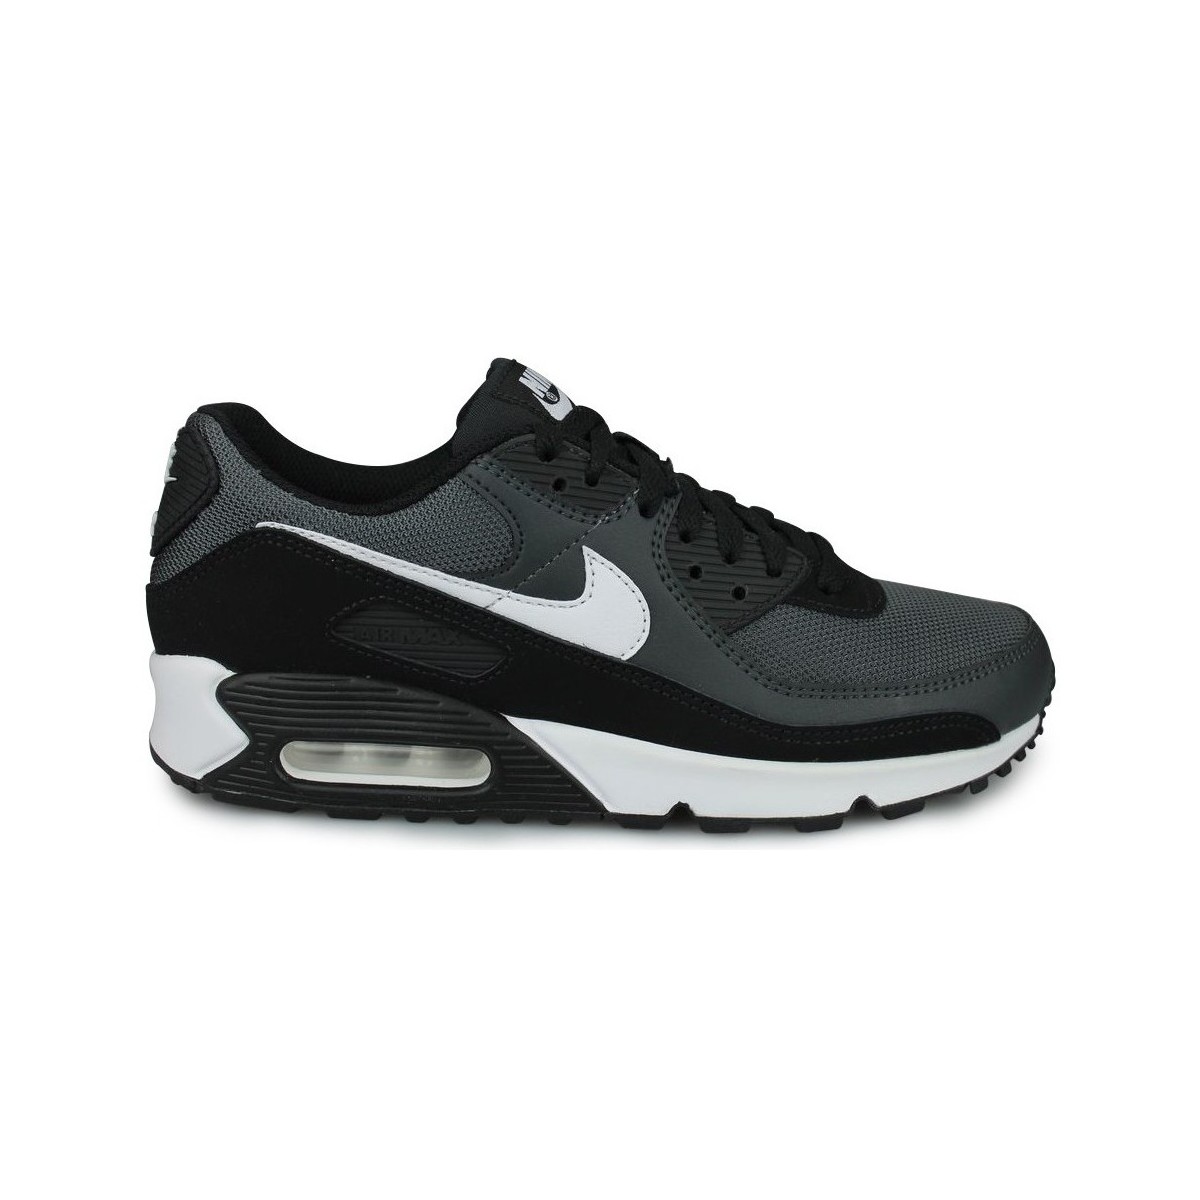 Chaussures Homme Baskets basses Nike Air Max 90 Gris Gris